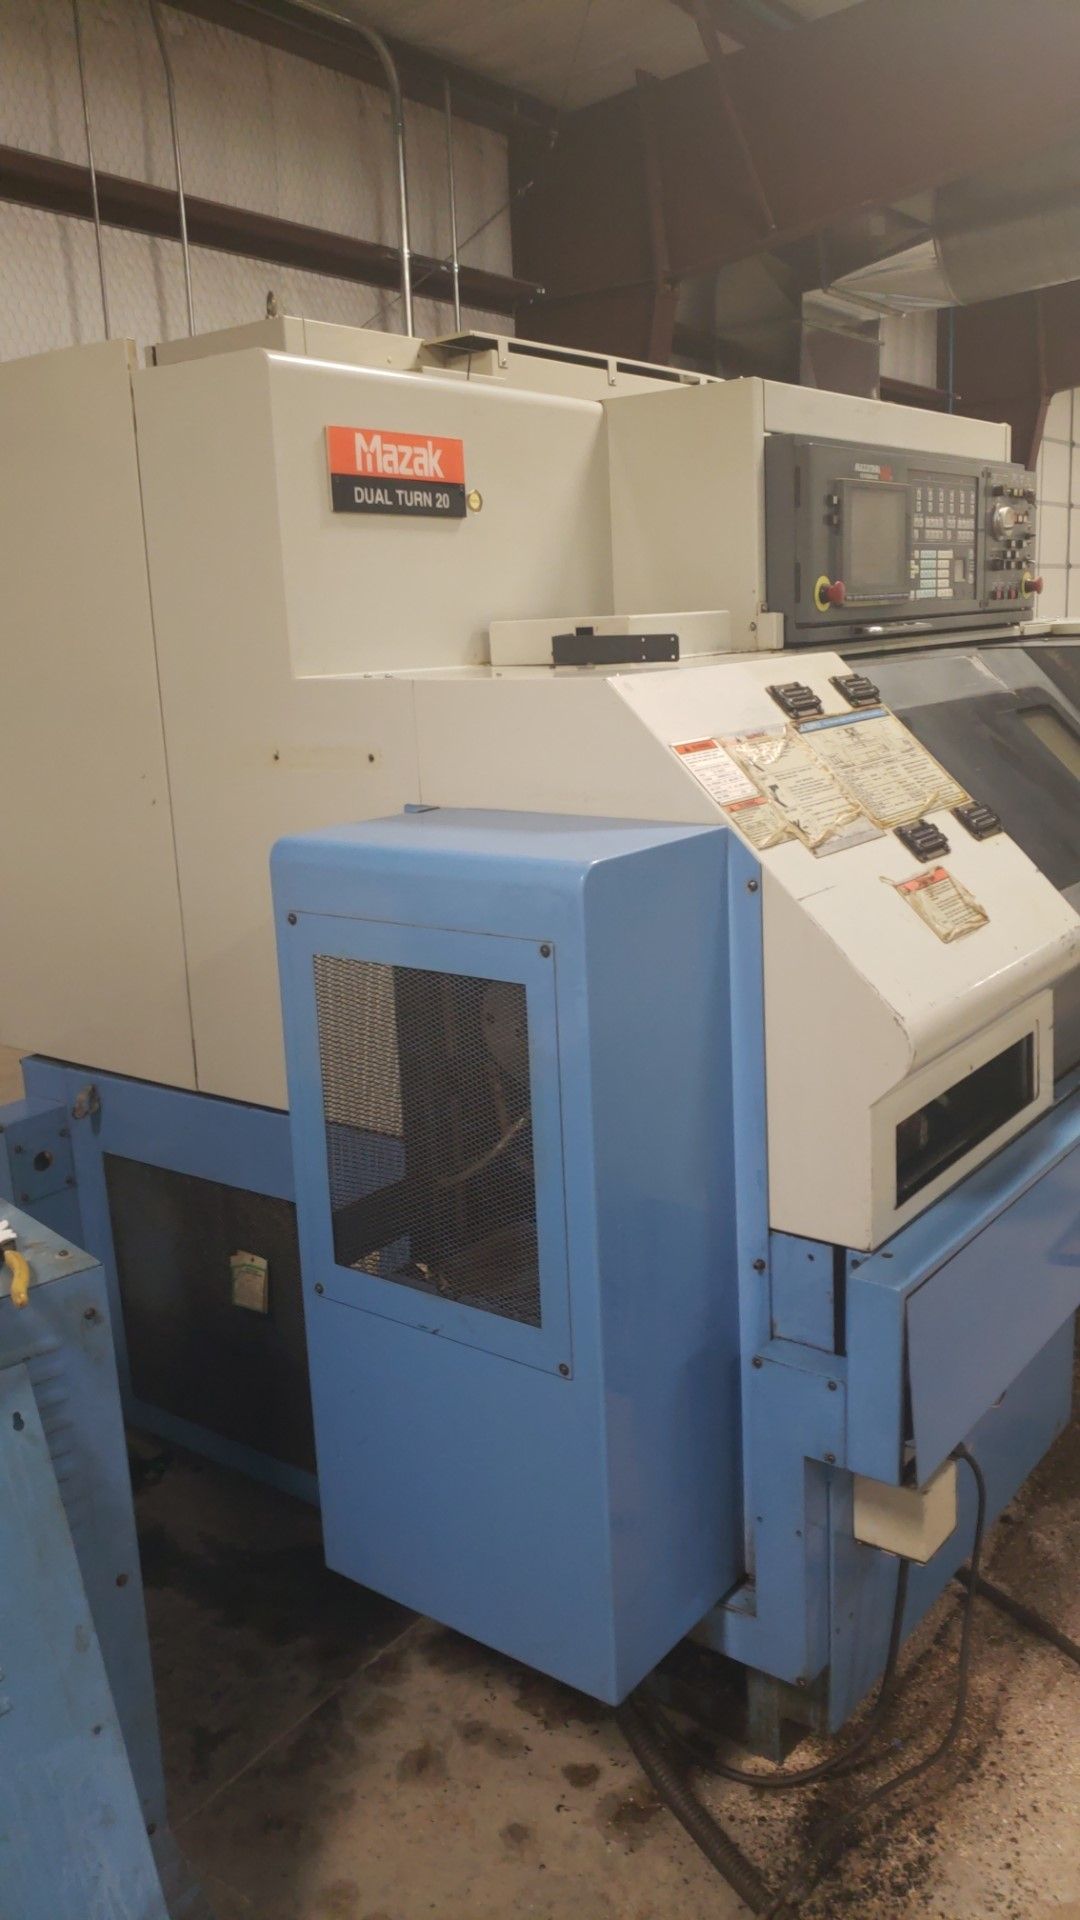 2004 Mazak Dual Turn 20 4 Axis Twin Spindle Twin Turret Opposed CNC Turning Center, rear discharge - Image 5 of 9